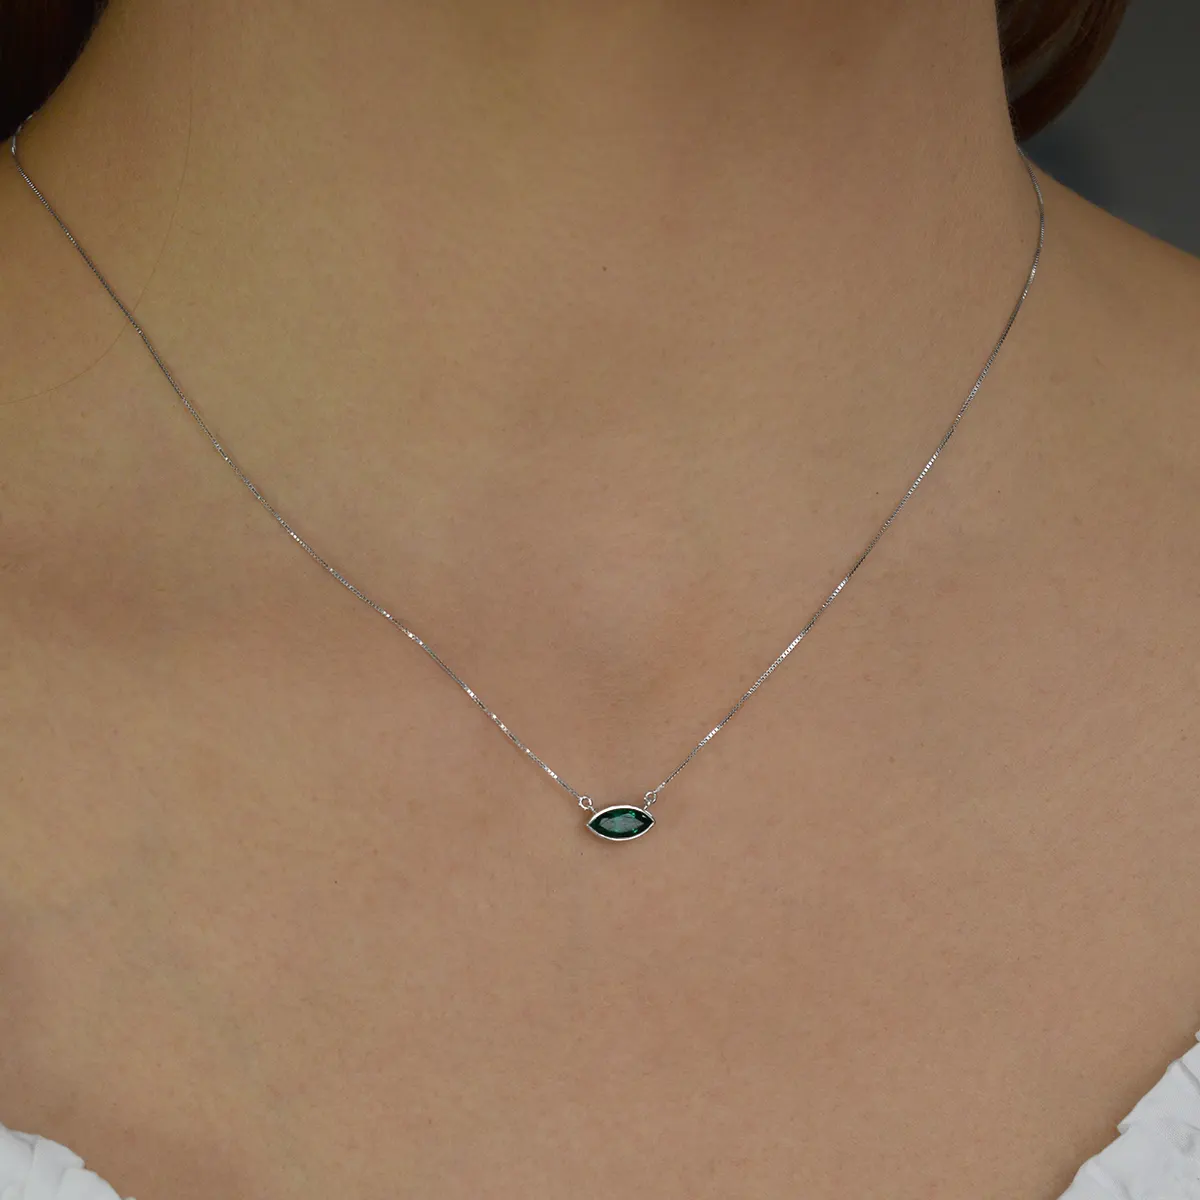 Muzo mine natural Colombian emerald with stunning dark green crystal beautifully set in a single stone solitaire necklace design in white gold